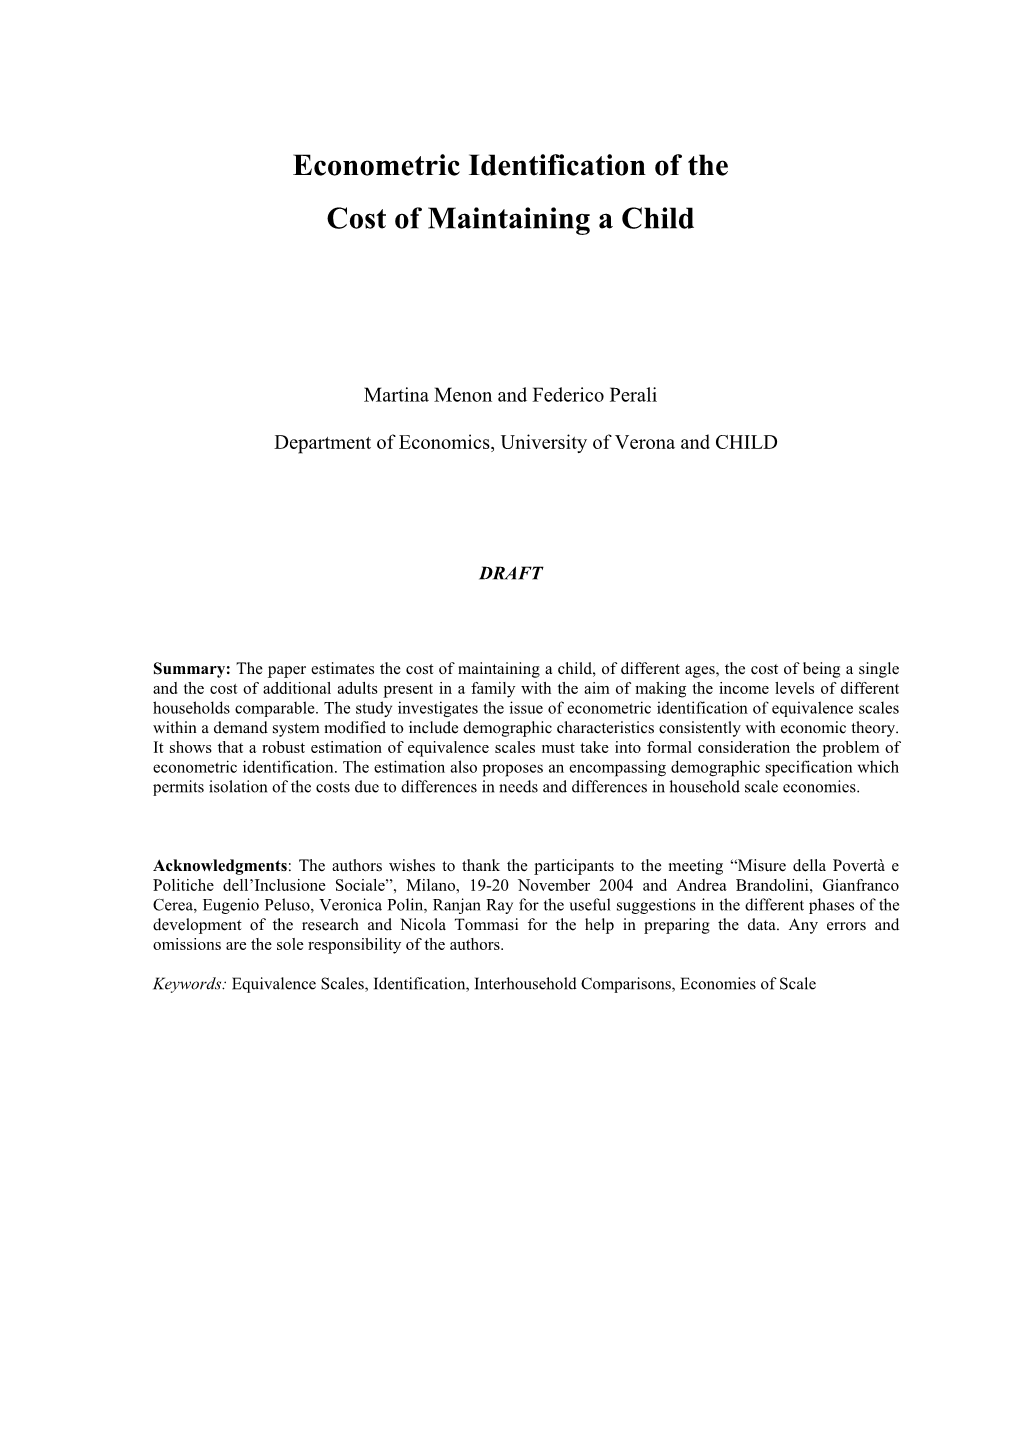 Econometric Identification of the Cost of Maintaining a Child